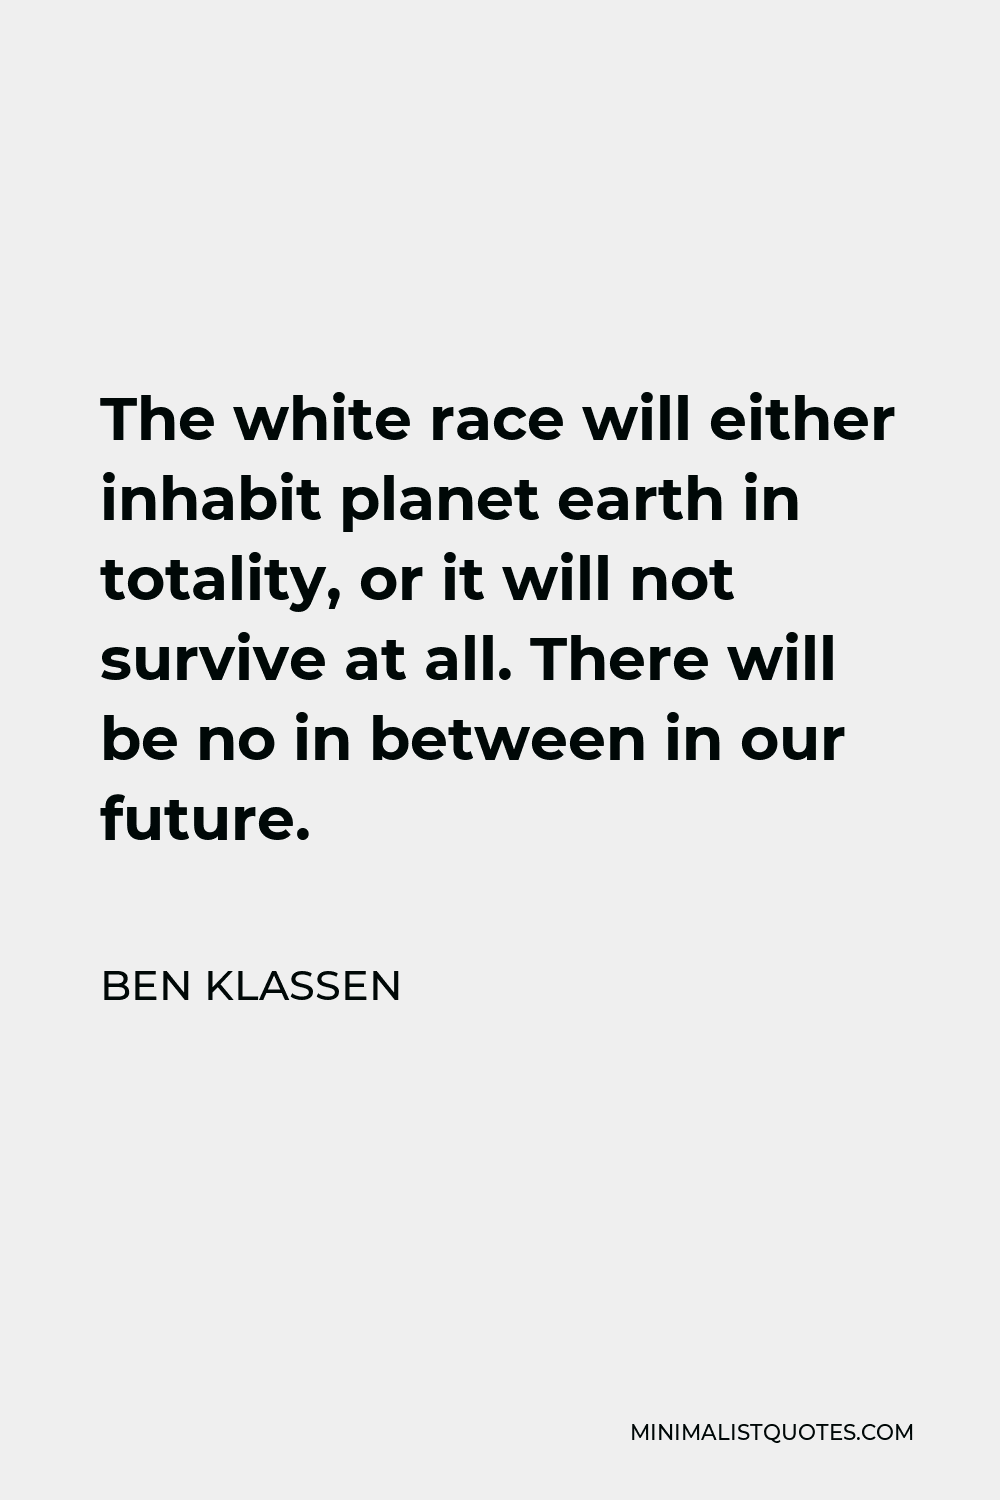 Ben Klassen Quote - The white race will either inhabit planet earth in totality, or it will not survive at all. There will be no in between in our future.